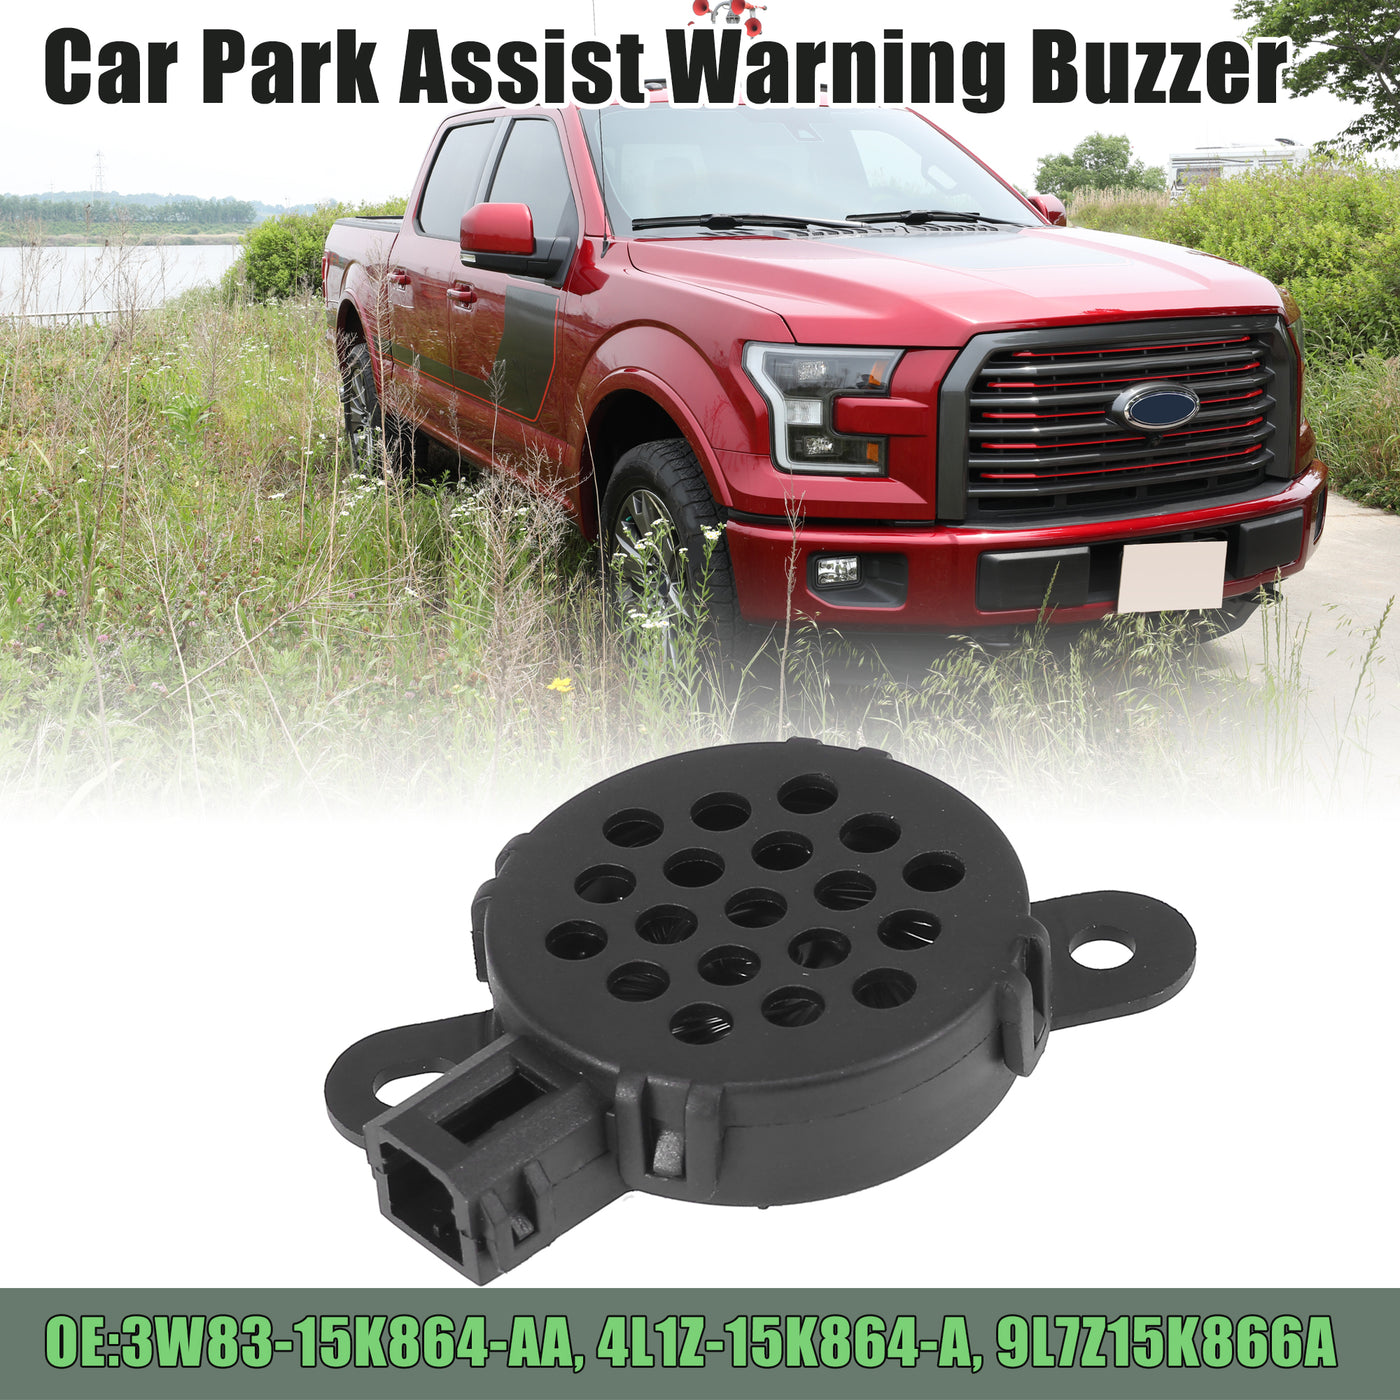 X AUTOHAUX Car Rear Park Assist Warning Buzzer for Ford F250 F350 F450 F550 Duty for Jaguar for Lincoln 3W83-15K864-AA 4L1Z-15K864-A 9L7Z15K866A